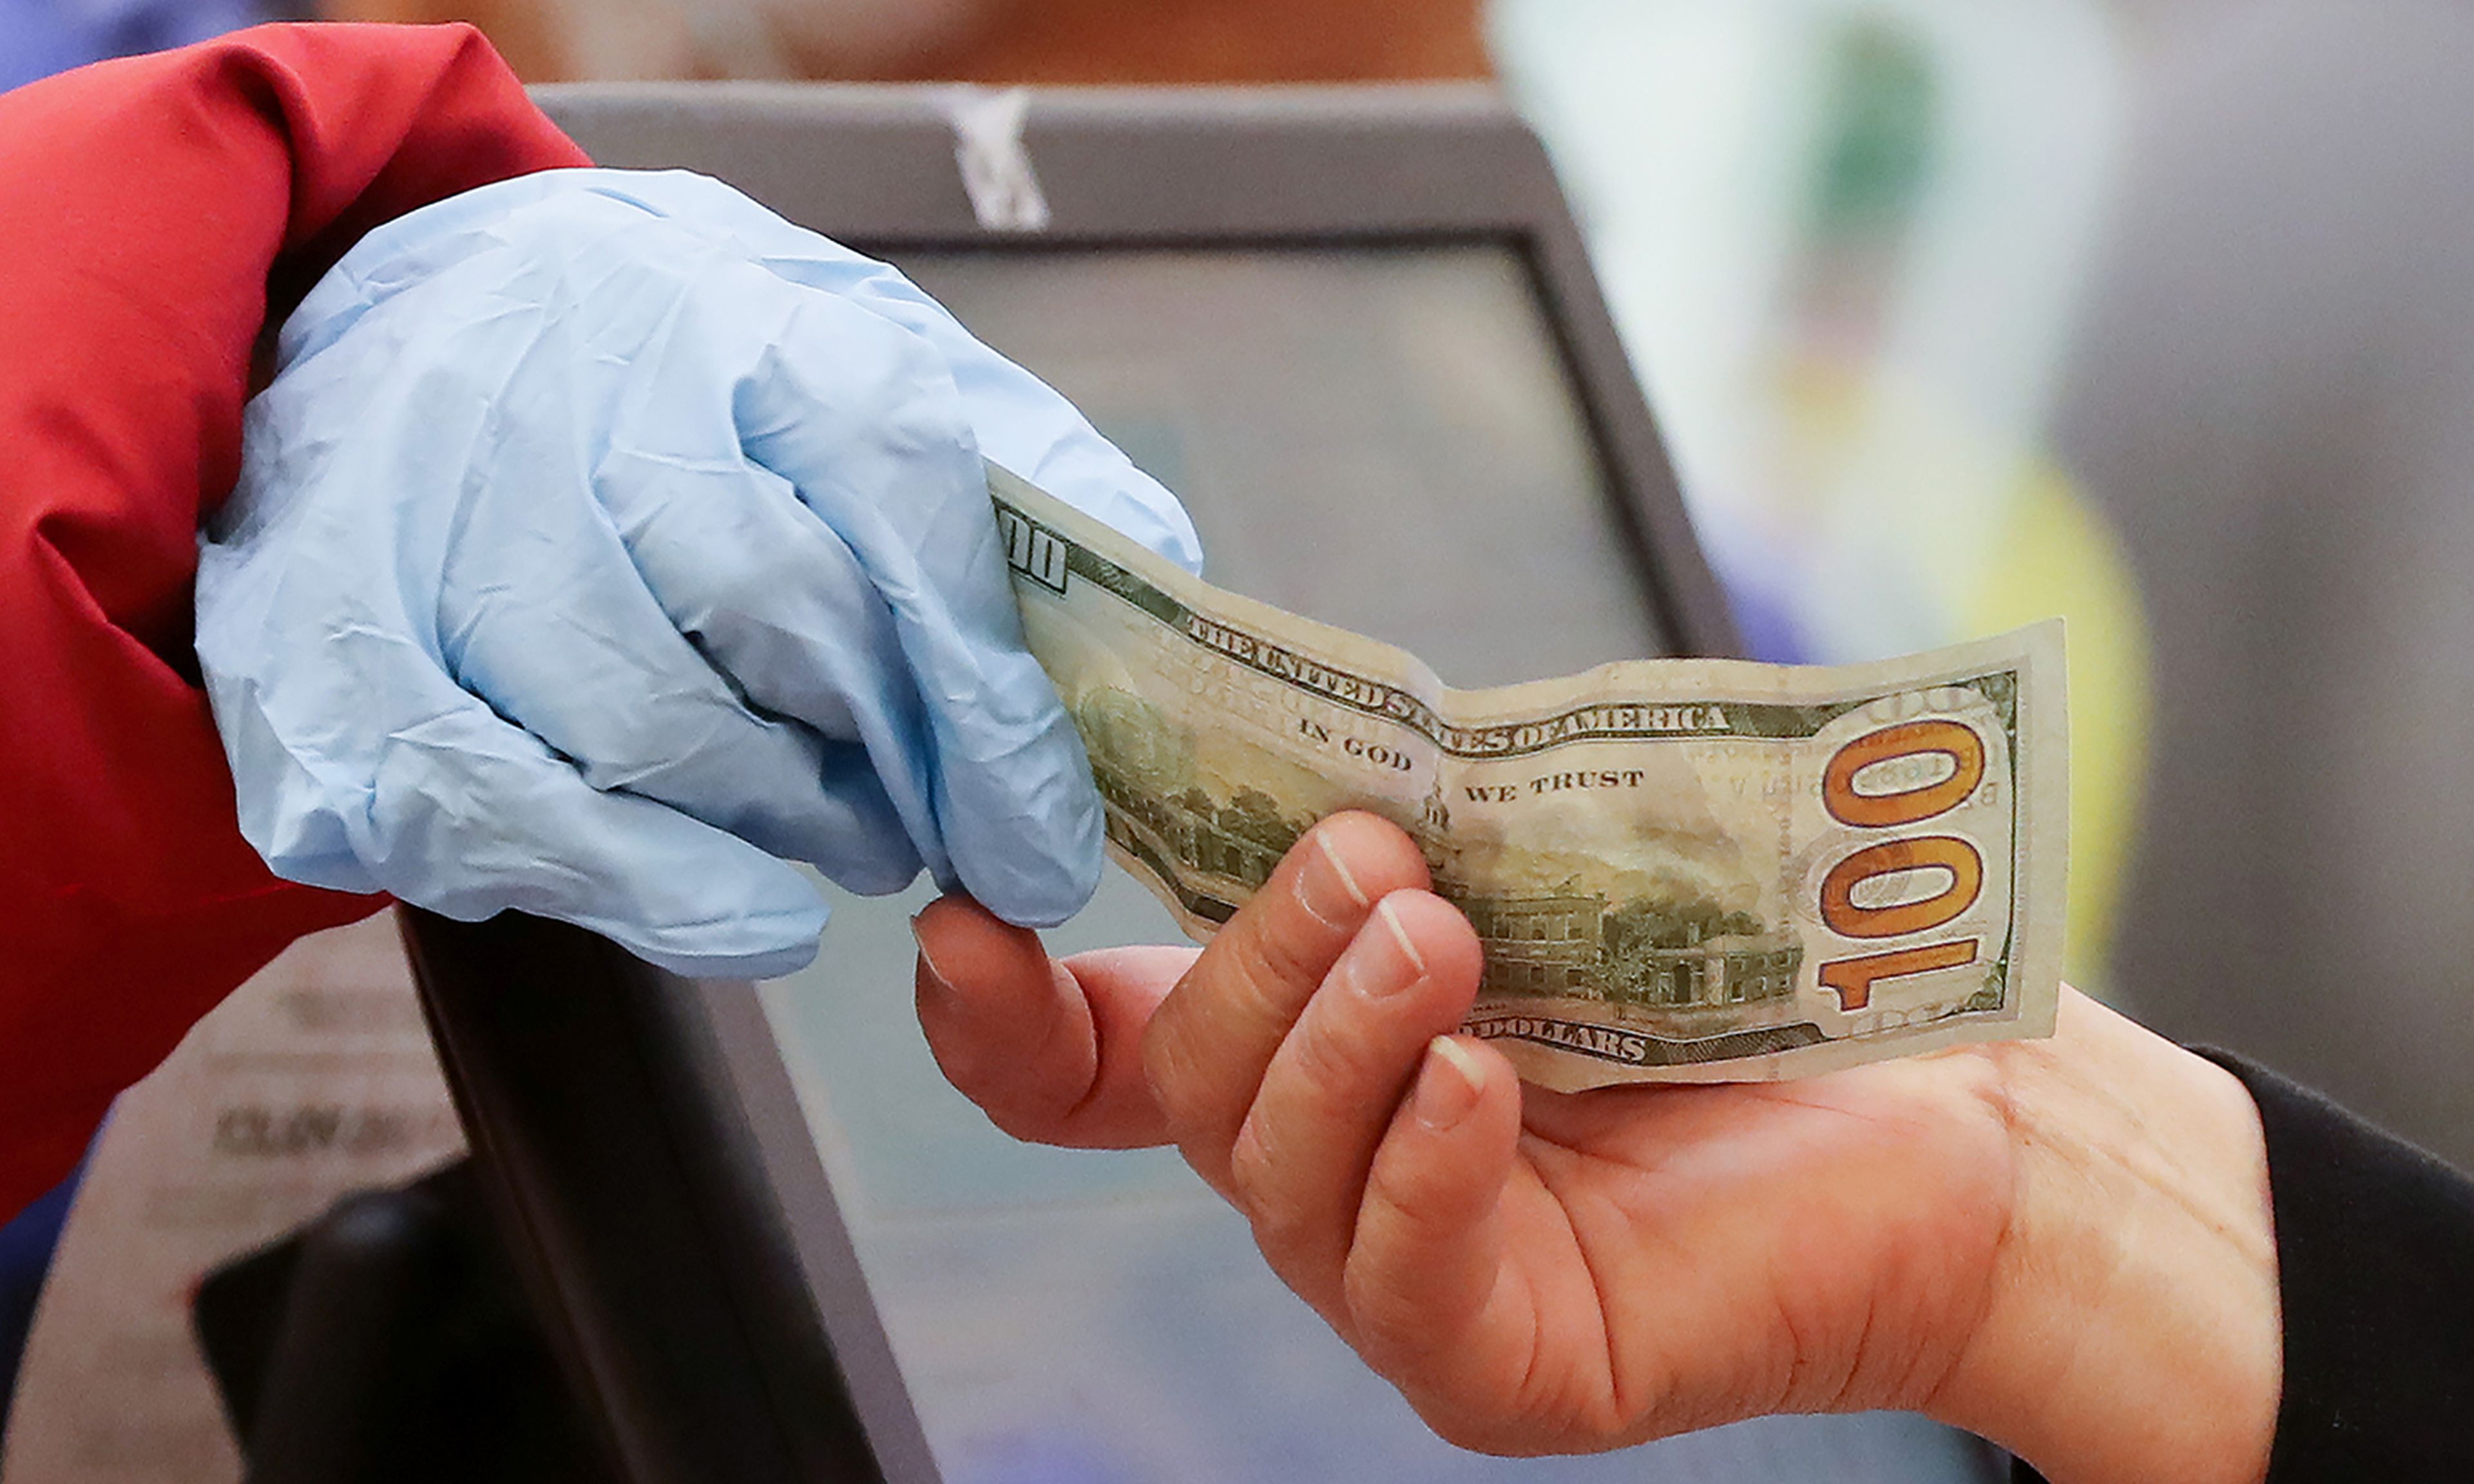 A woman pays cash while wearing gloves at Northgate Gonzalez Market on March 19, 2020, in Los Angeles. (Photo by Mario Tama/Getty Images)